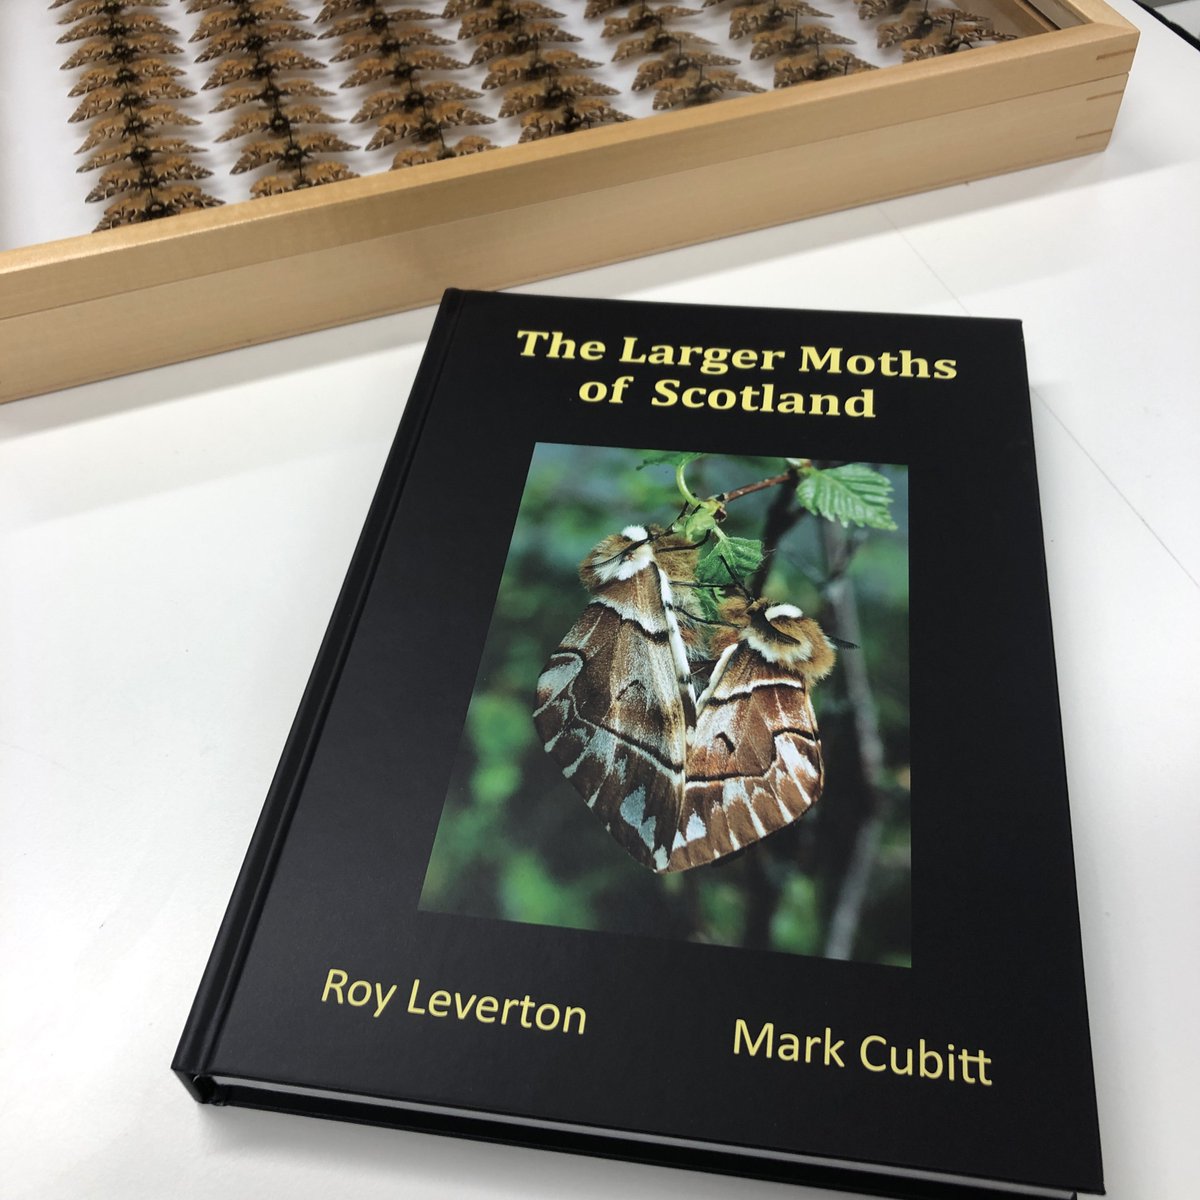 Huge congrats to @MarkCubitt & Roy Leverton on the release of their new book - The Larger Moths of Scotland 🏴󠁧󠁢󠁳󠁣󠁴󠁿 

Mark popped in today to gift us a copy for the library. Thank you! 😊📗 #MothsMatter